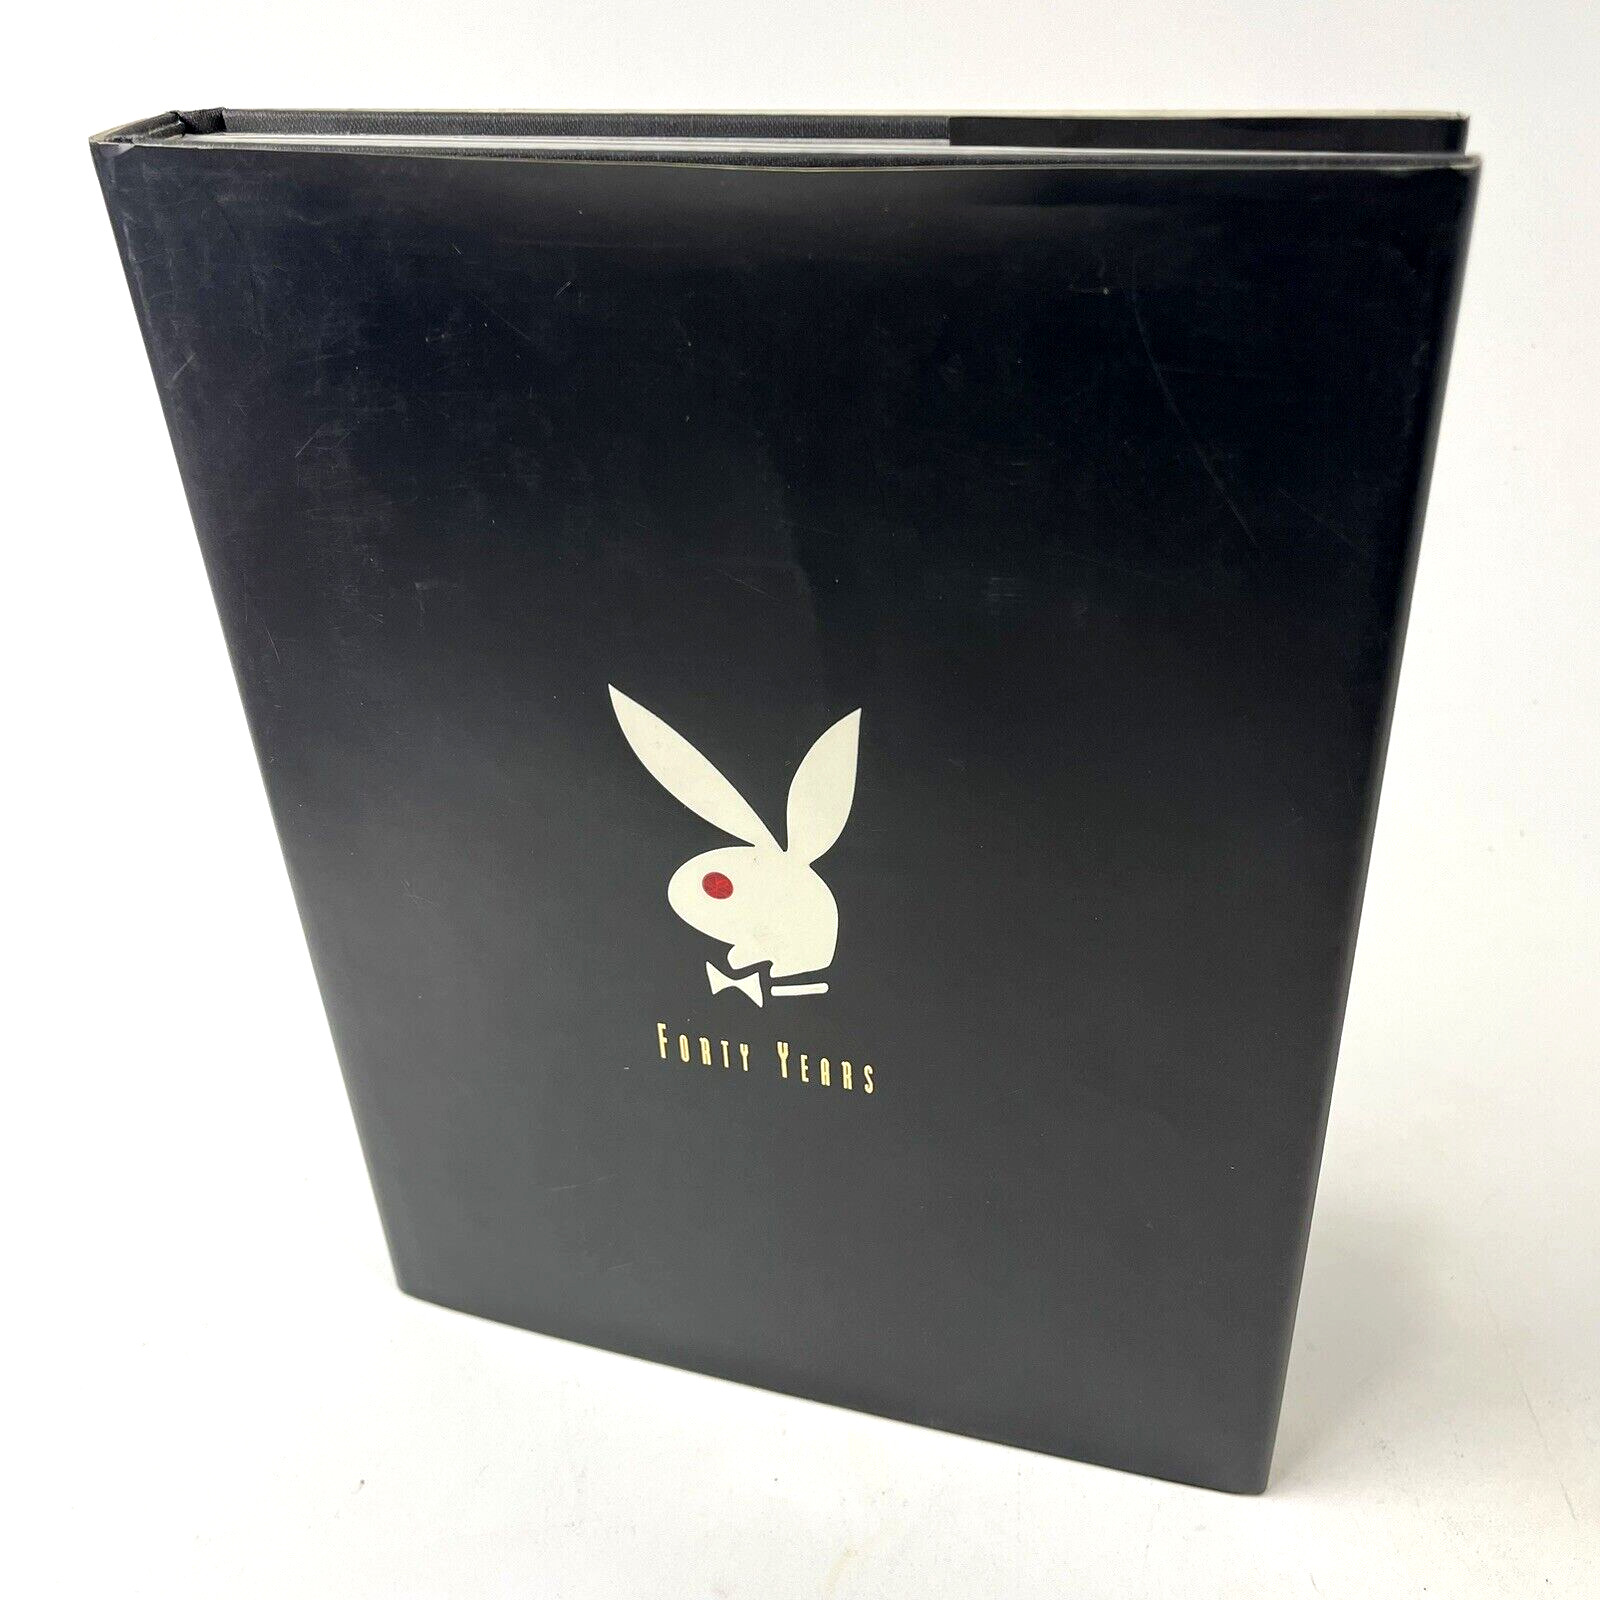 THE PLAYBOY BOOK Forty Years HUGH HEFFNER signed Book - 1994 1st Printing No COA